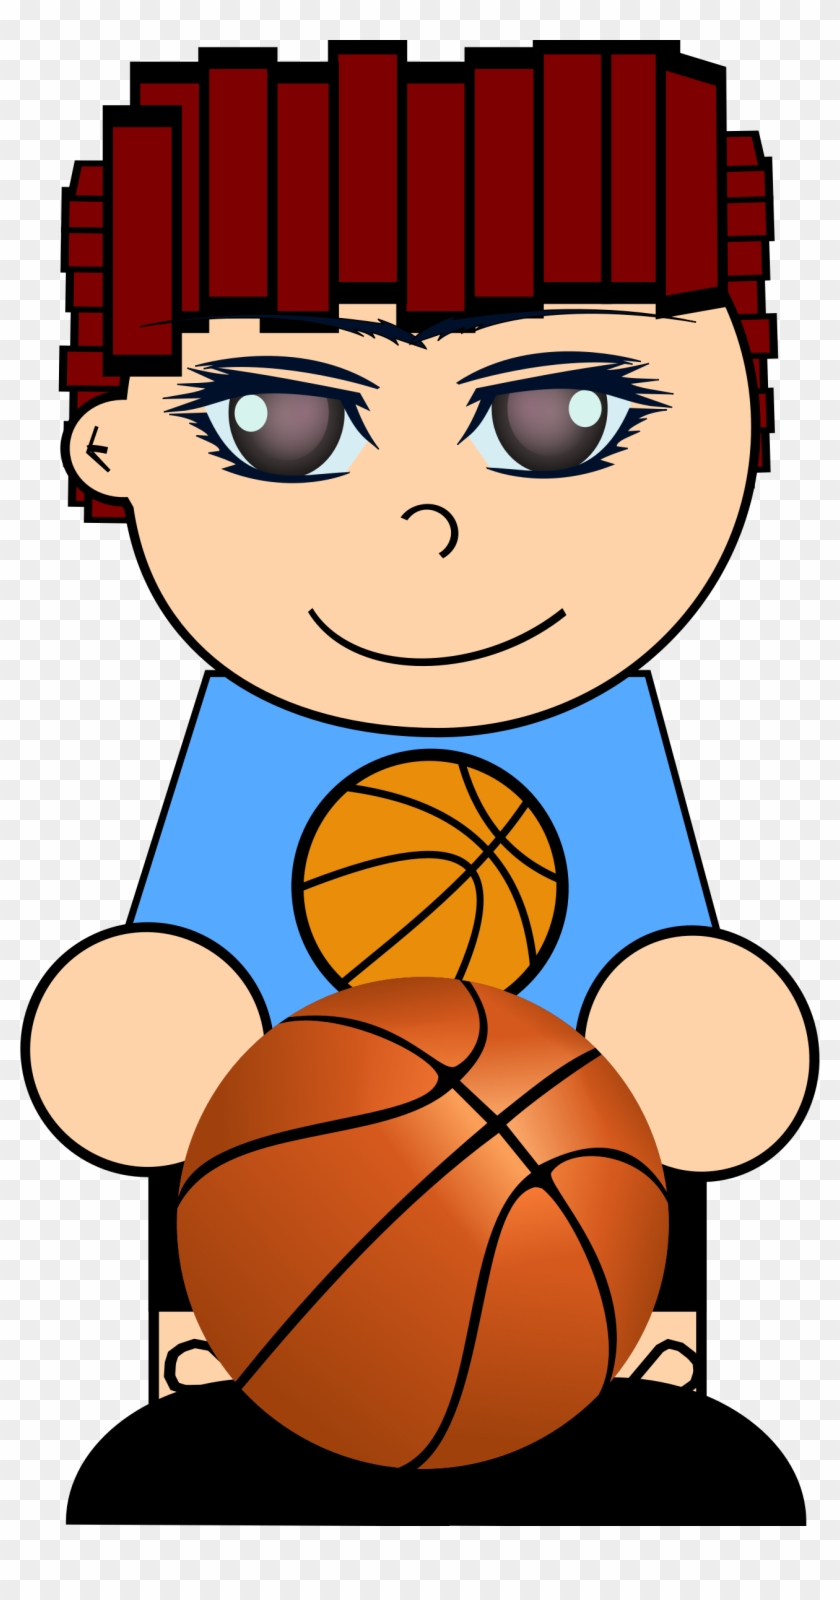 This Free Icons Png Design Of Boy With Basketball Clipart #1234487